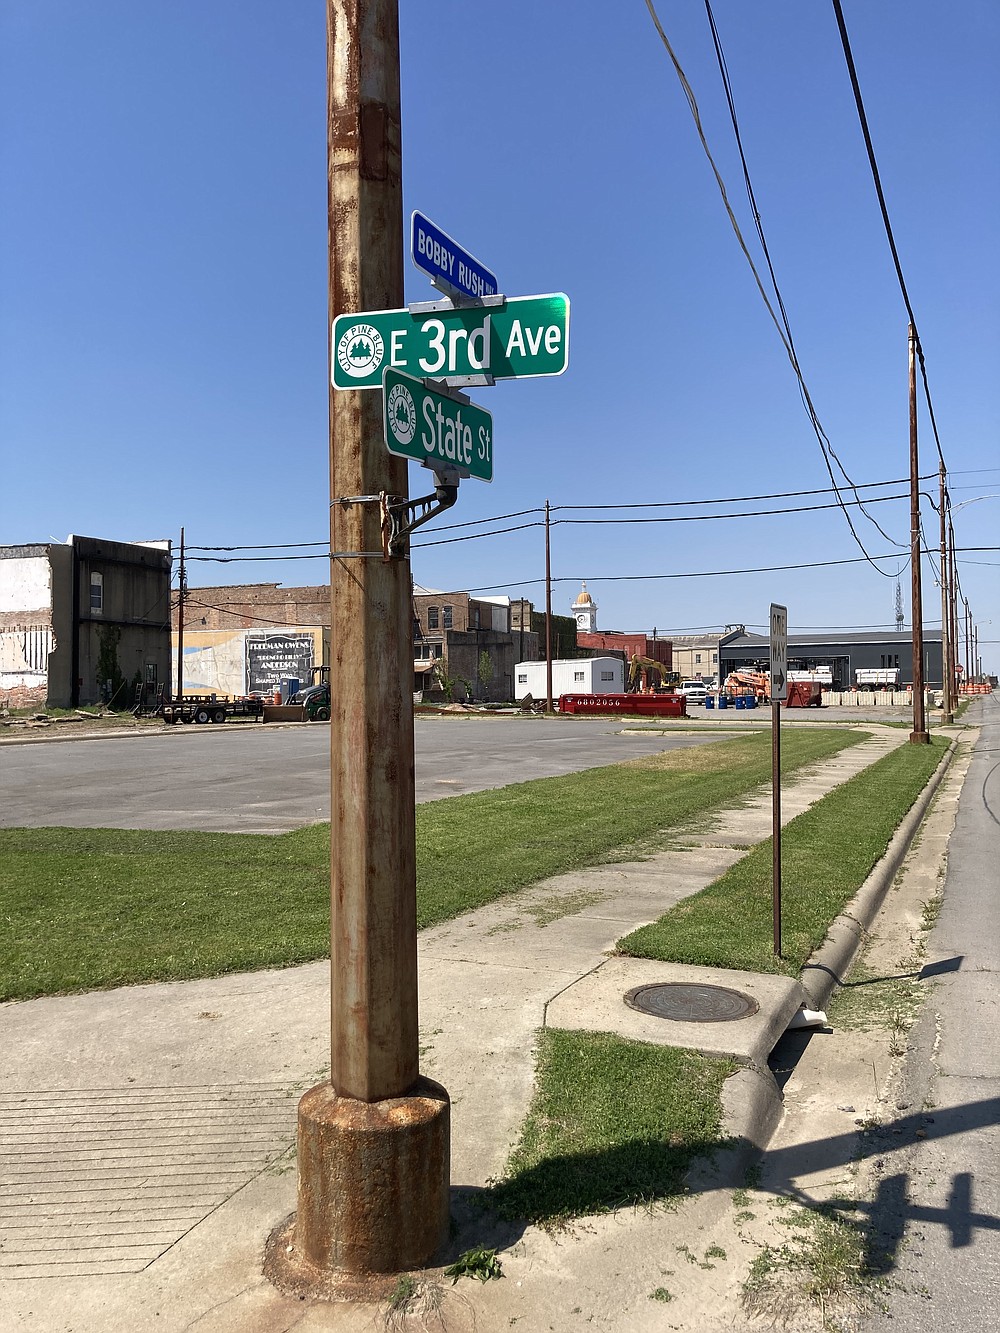 A tourism development that focuses on Pine Bluff's heritage, art and culture would include the area around Third Avenue and State Street. (Pine Bluff Commercial/Byron Tate)